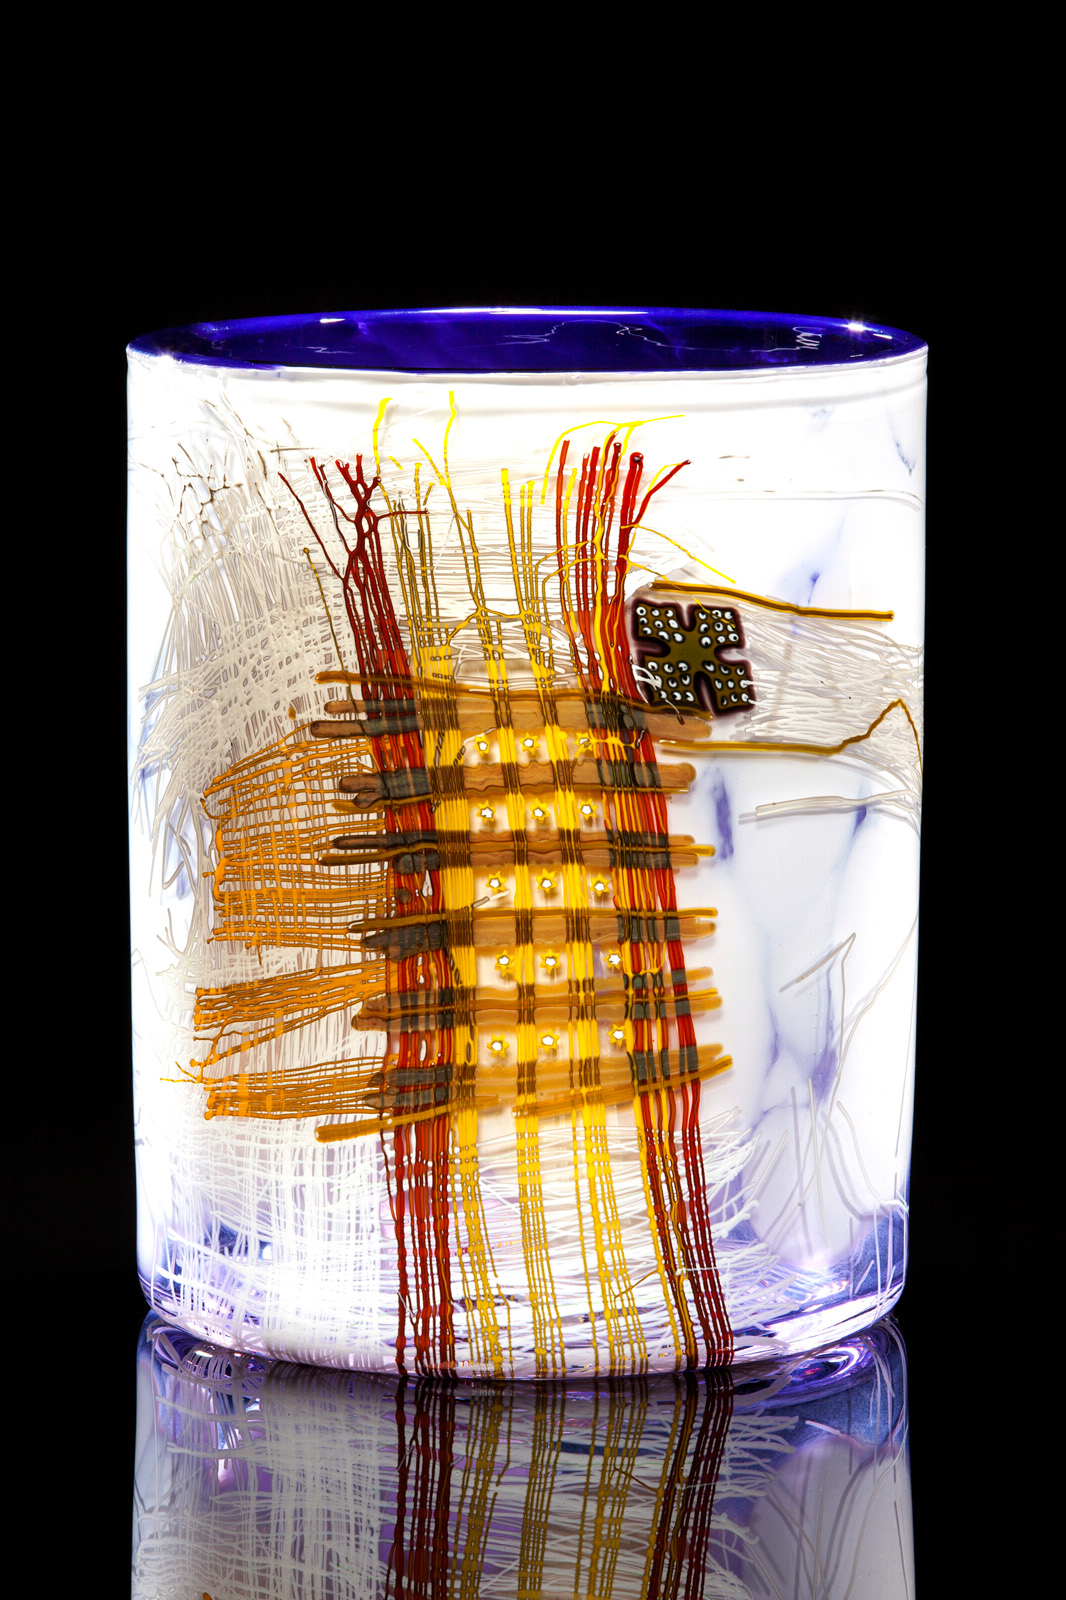 Dale Chihuly, Aubergine White Cylinder with Drawing, 2012